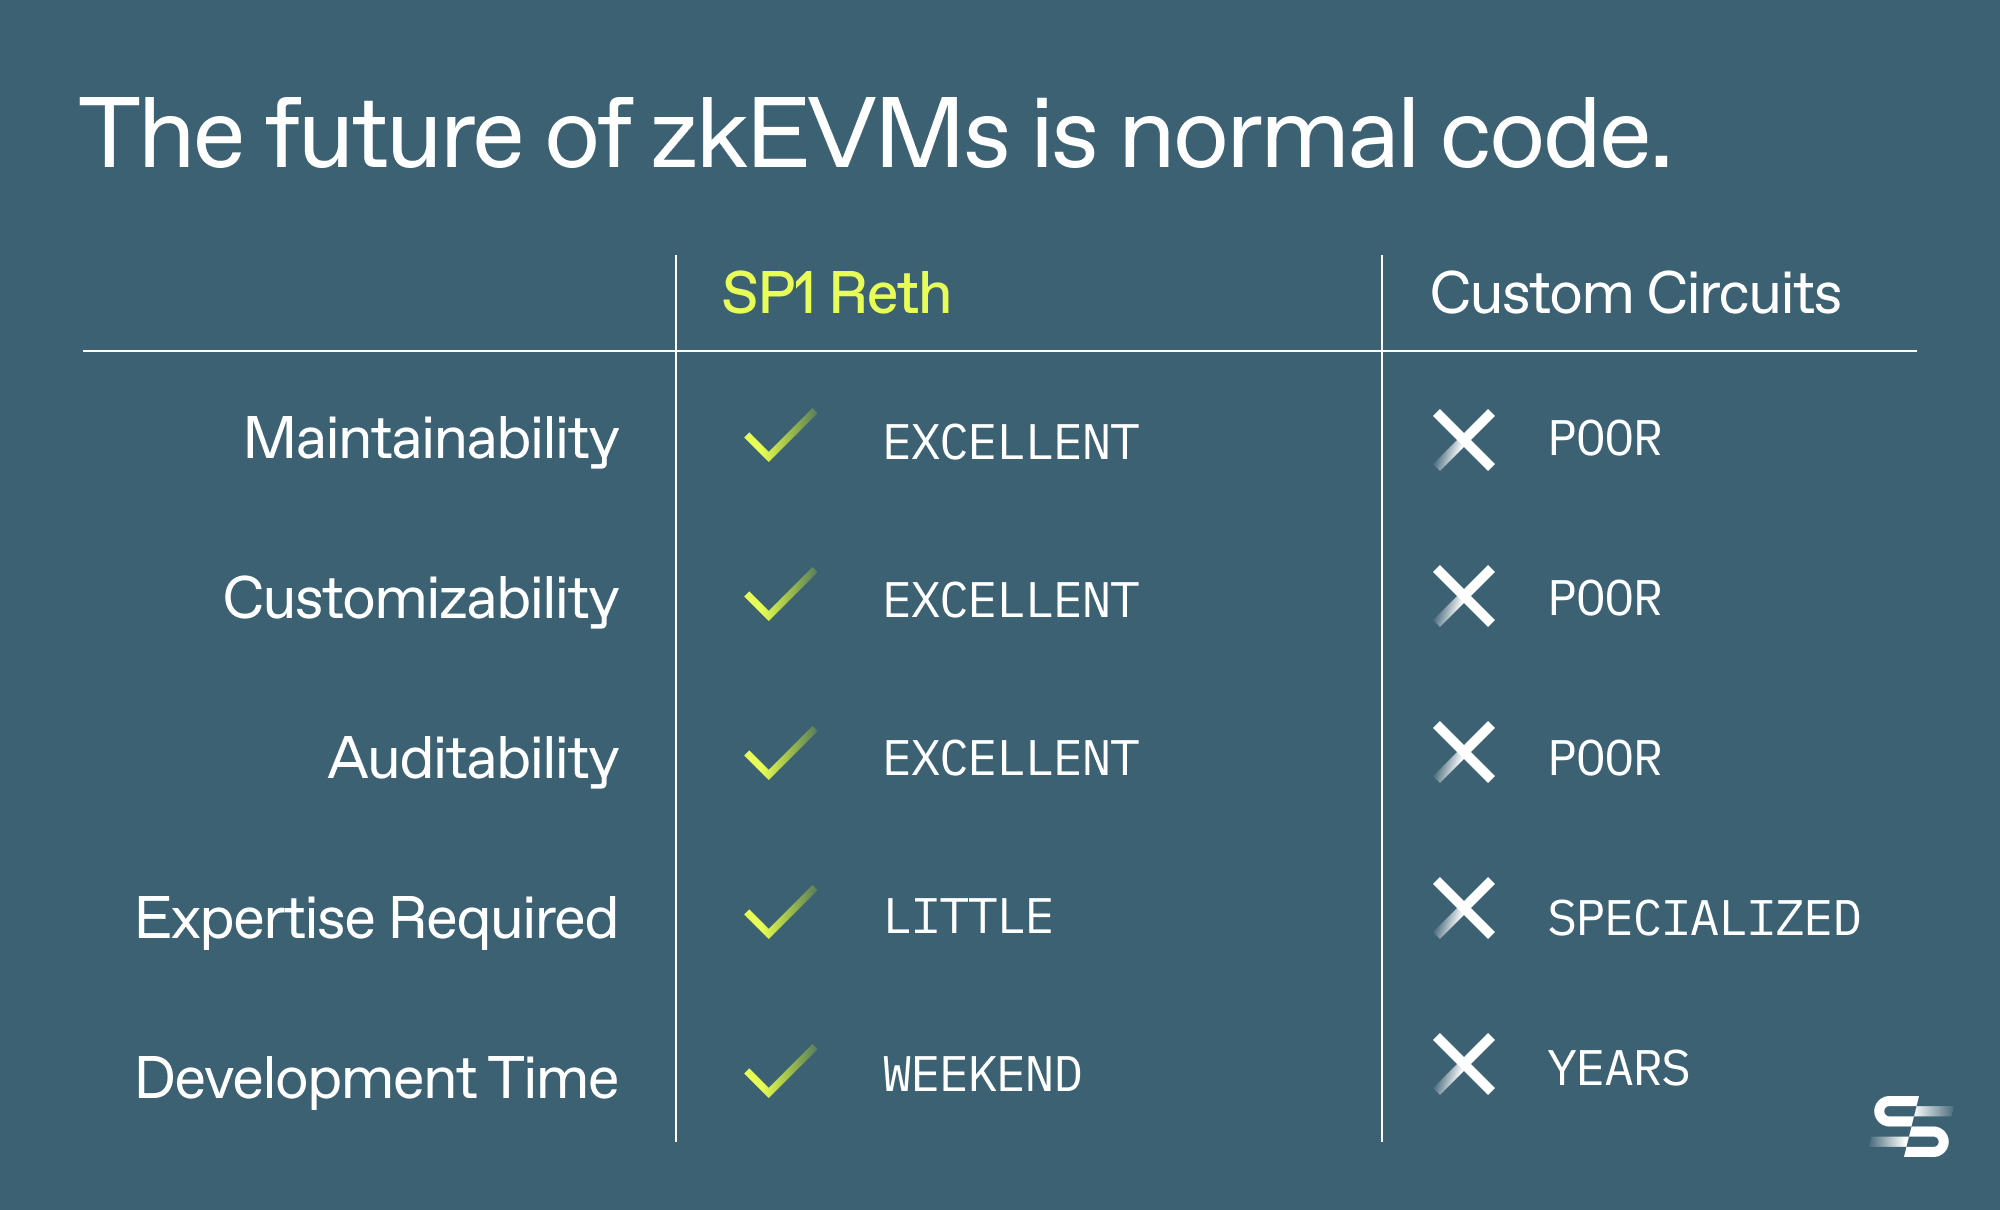 Introducing SP1 Reth: A performant type-1 zkEVM built with SP1